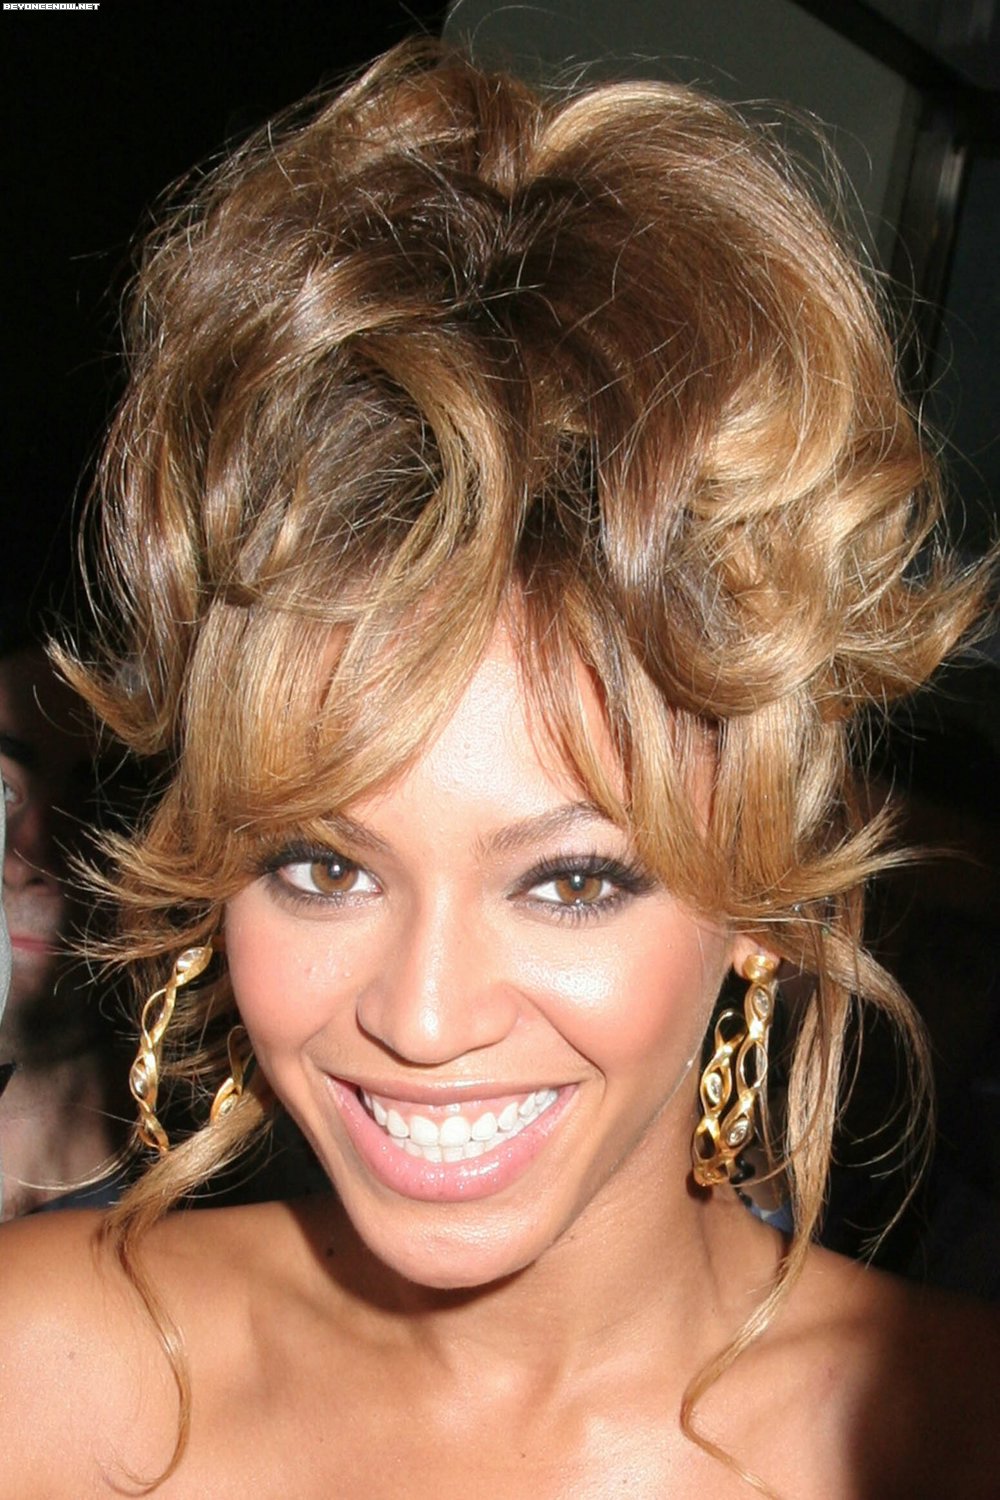 celebrity photos beyonce knowles beyonce knowles photo 1918 0 vote